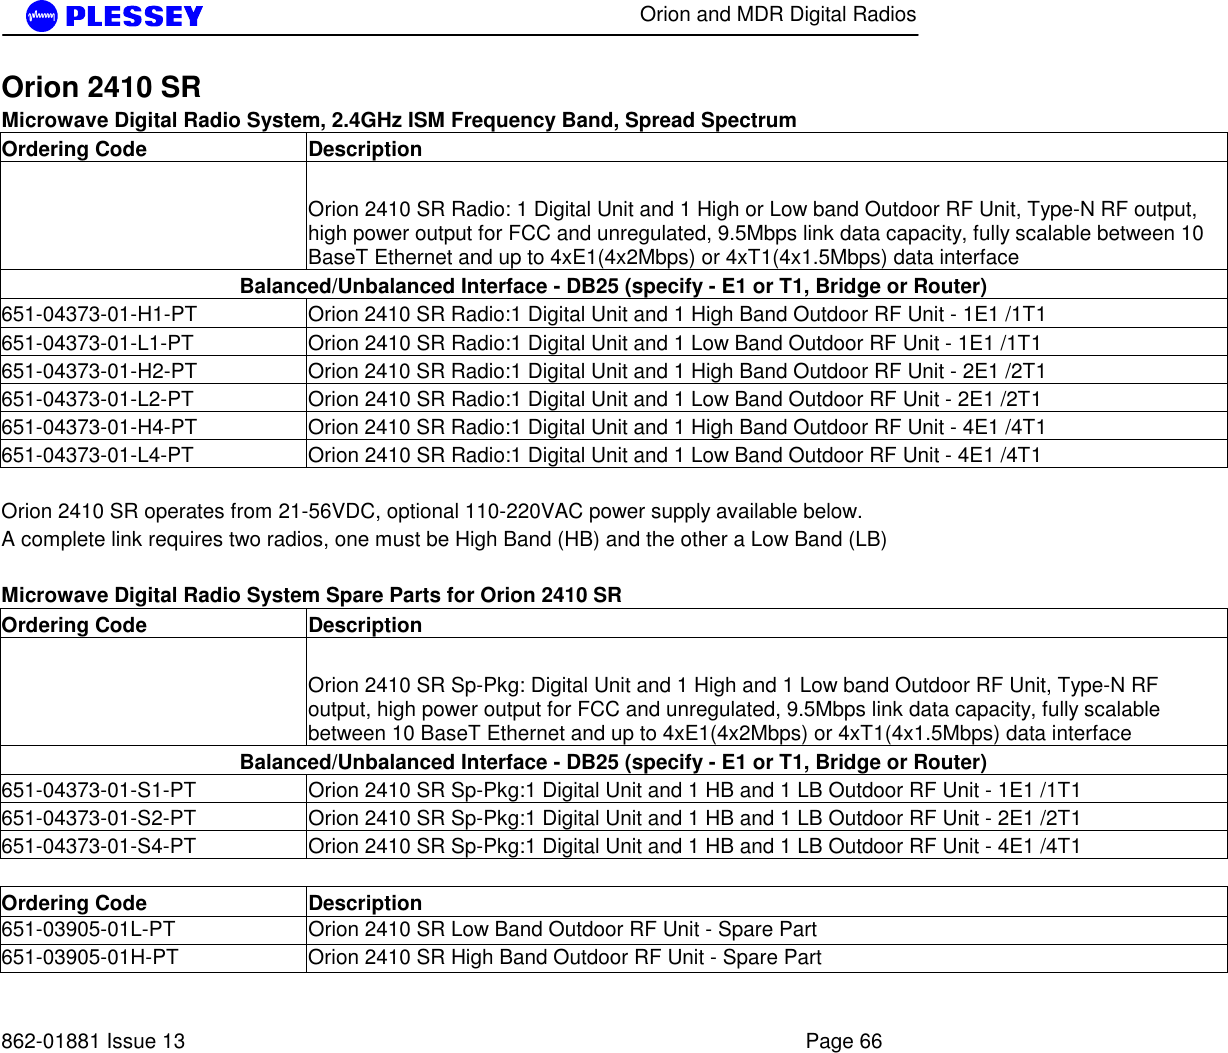      Orion and MDR Digital Radios   862-01881 Issue 13    Page 66 Orion 2410 SR   Microwave Digital Radio System, 2.4GHz ISM Frequency Band, Spread Spectrum Ordering Code  Description   Orion 2410 SR Radio: 1 Digital Unit and 1 High or Low band Outdoor RF Unit, Type-N RF output, high power output for FCC and unregulated, 9.5Mbps link data capacity, fully scalable between 10 BaseT Ethernet and up to 4xE1(4x2Mbps) or 4xT1(4x1.5Mbps) data interface Balanced/Unbalanced Interface - DB25 (specify - E1 or T1, Bridge or Router) 651-04373-01-H1-PT  Orion 2410 SR Radio:1 Digital Unit and 1 High Band Outdoor RF Unit - 1E1 /1T1 651-04373-01-L1-PT  Orion 2410 SR Radio:1 Digital Unit and 1 Low Band Outdoor RF Unit - 1E1 /1T1 651-04373-01-H2-PT  Orion 2410 SR Radio:1 Digital Unit and 1 High Band Outdoor RF Unit - 2E1 /2T1 651-04373-01-L2-PT  Orion 2410 SR Radio:1 Digital Unit and 1 Low Band Outdoor RF Unit - 2E1 /2T1 651-04373-01-H4-PT  Orion 2410 SR Radio:1 Digital Unit and 1 High Band Outdoor RF Unit - 4E1 /4T1 651-04373-01-L4-PT  Orion 2410 SR Radio:1 Digital Unit and 1 Low Band Outdoor RF Unit - 4E1 /4T1   Orion 2410 SR operates from 21-56VDC, optional 110-220VAC power supply available below. A complete link requires two radios, one must be High Band (HB) and the other a Low Band (LB)   Microwave Digital Radio System Spare Parts for Orion 2410 SR Ordering Code  Description   Orion 2410 SR Sp-Pkg: Digital Unit and 1 High and 1 Low band Outdoor RF Unit, Type-N RF output, high power output for FCC and unregulated, 9.5Mbps link data capacity, fully scalable between 10 BaseT Ethernet and up to 4xE1(4x2Mbps) or 4xT1(4x1.5Mbps) data interface Balanced/Unbalanced Interface - DB25 (specify - E1 or T1, Bridge or Router) 651-04373-01-S1-PT  Orion 2410 SR Sp-Pkg:1 Digital Unit and 1 HB and 1 LB Outdoor RF Unit - 1E1 /1T1 651-04373-01-S2-PT  Orion 2410 SR Sp-Pkg:1 Digital Unit and 1 HB and 1 LB Outdoor RF Unit - 2E1 /2T1 651-04373-01-S4-PT  Orion 2410 SR Sp-Pkg:1 Digital Unit and 1 HB and 1 LB Outdoor RF Unit - 4E1 /4T1    Ordering Code  Description 651-03905-01L-PT  Orion 2410 SR Low Band Outdoor RF Unit - Spare Part 651-03905-01H-PT  Orion 2410 SR High Band Outdoor RF Unit - Spare Part 